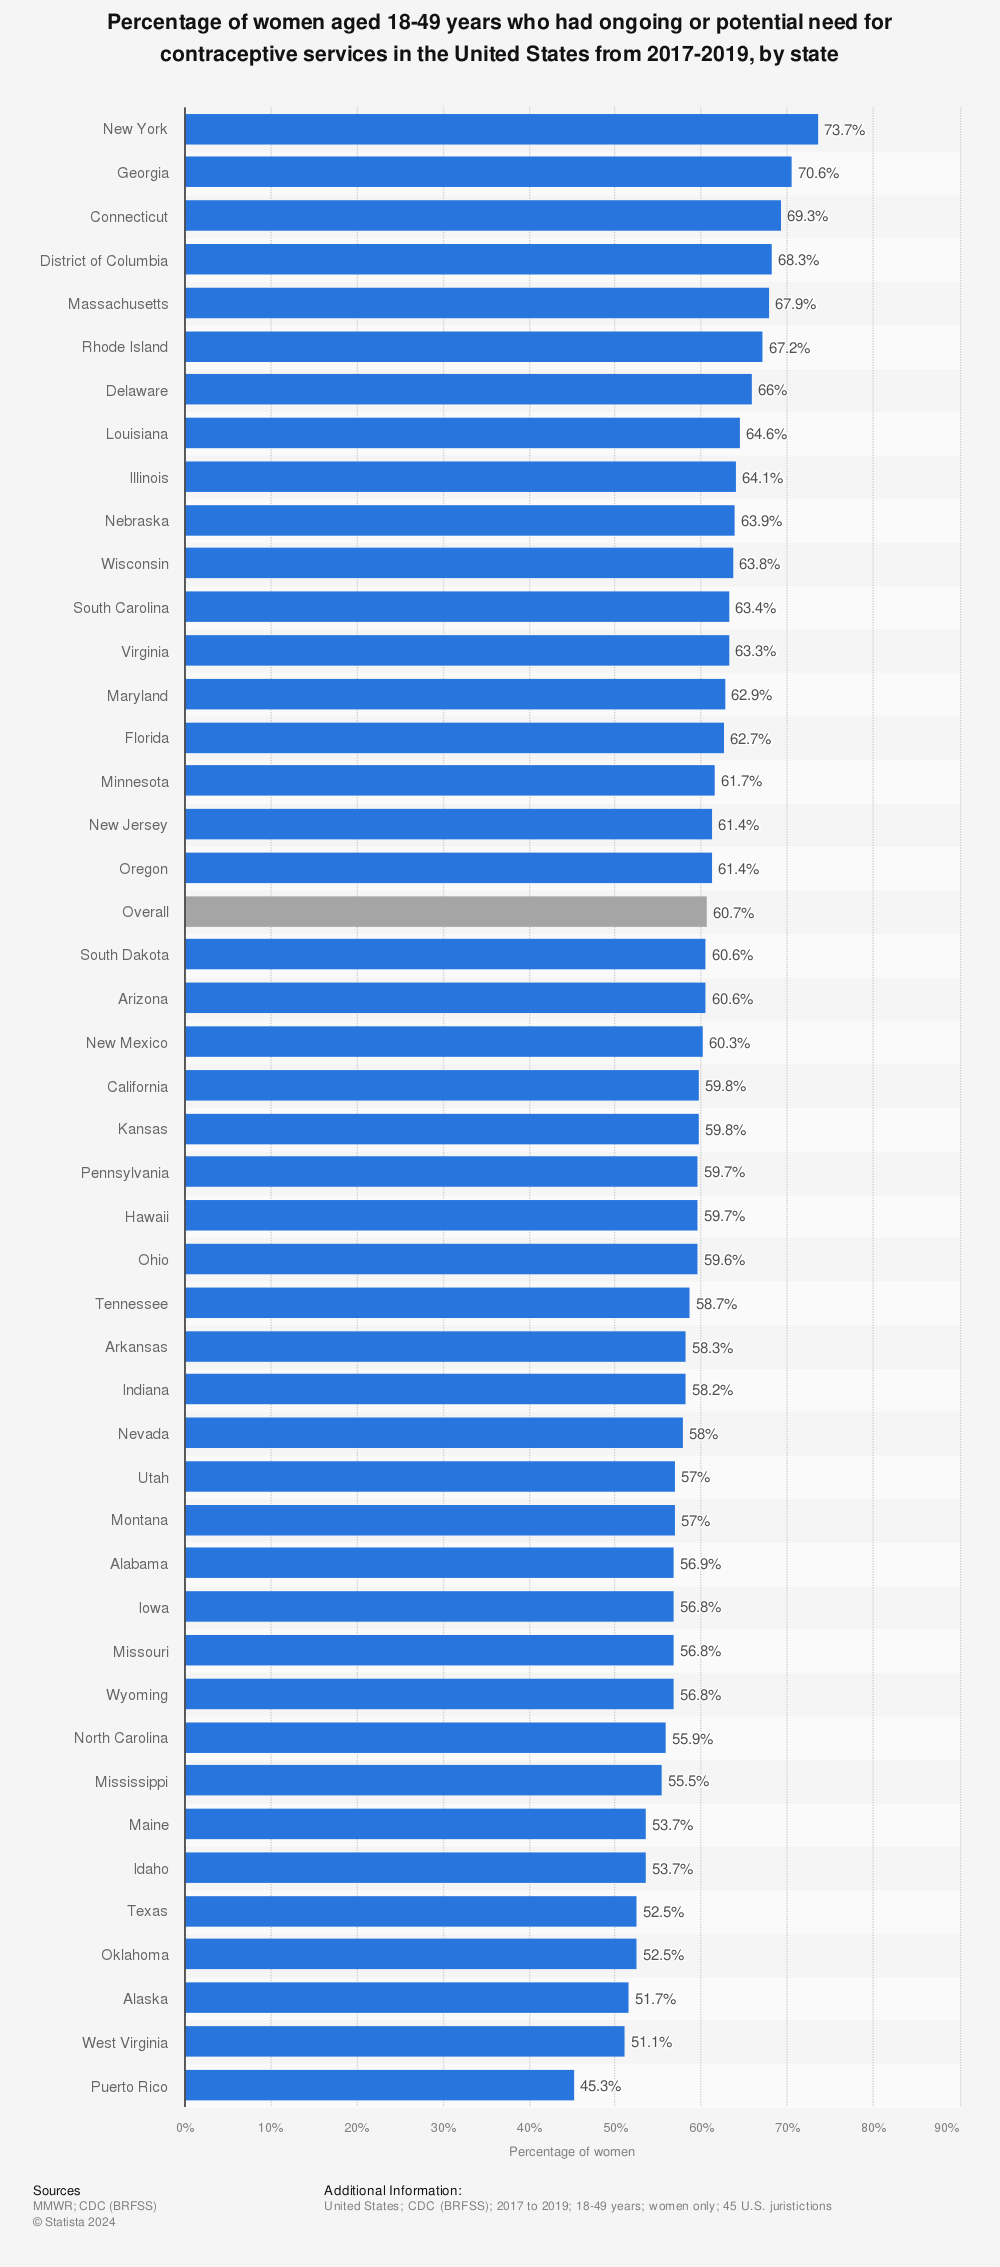 Statistic: Percentage of women aged 18-49 years who had ongoing or potential need for contraceptive services in the United States from 2017-2019, by state | Statista